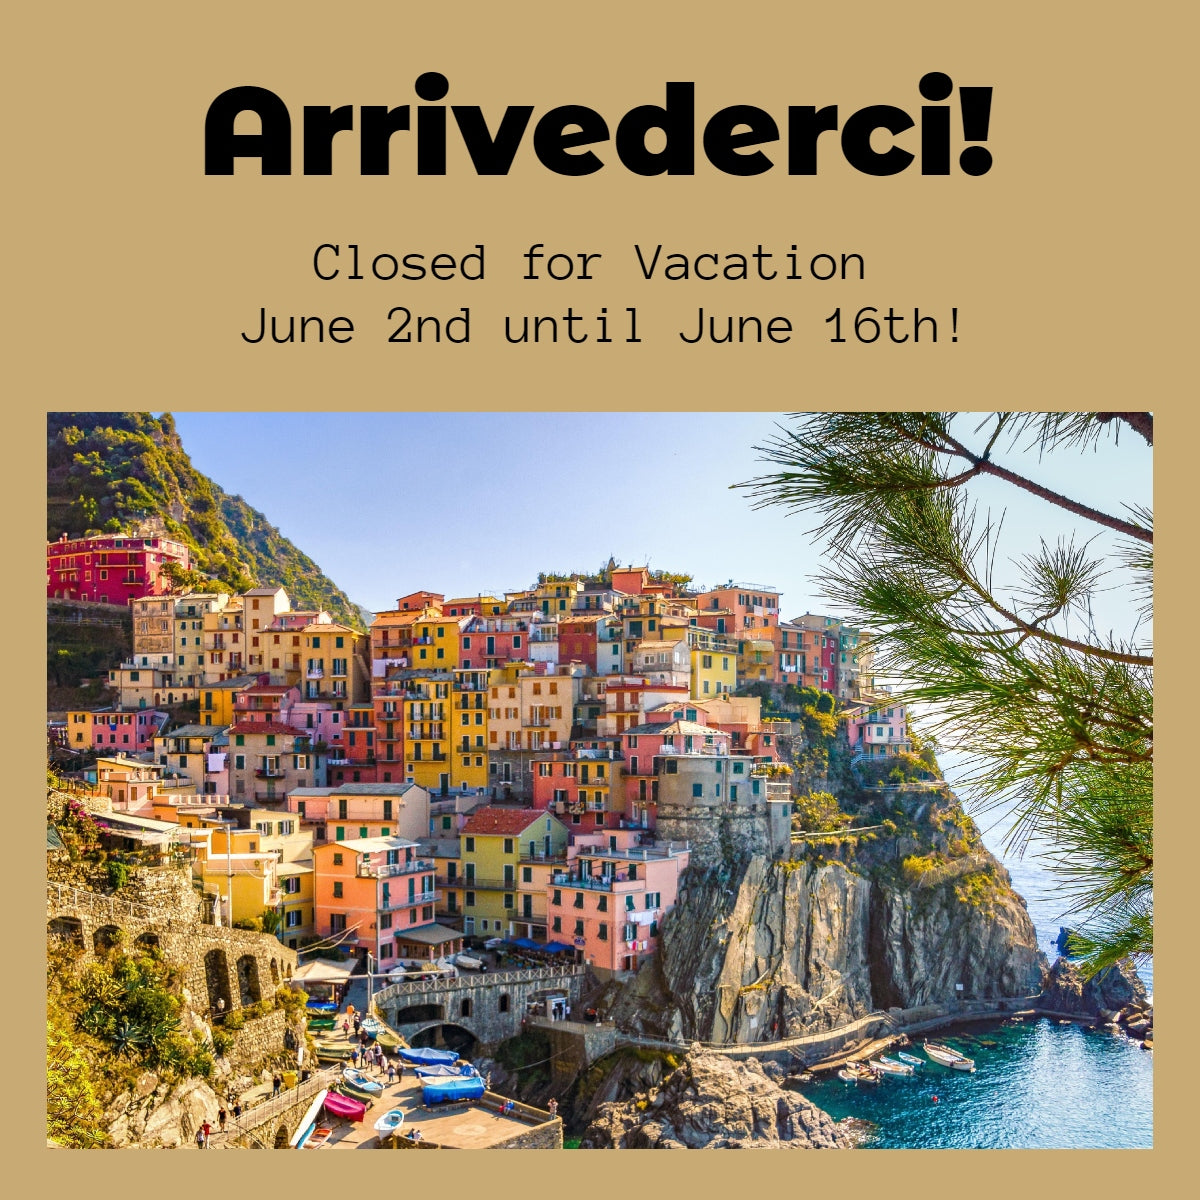 Closed for Vacation